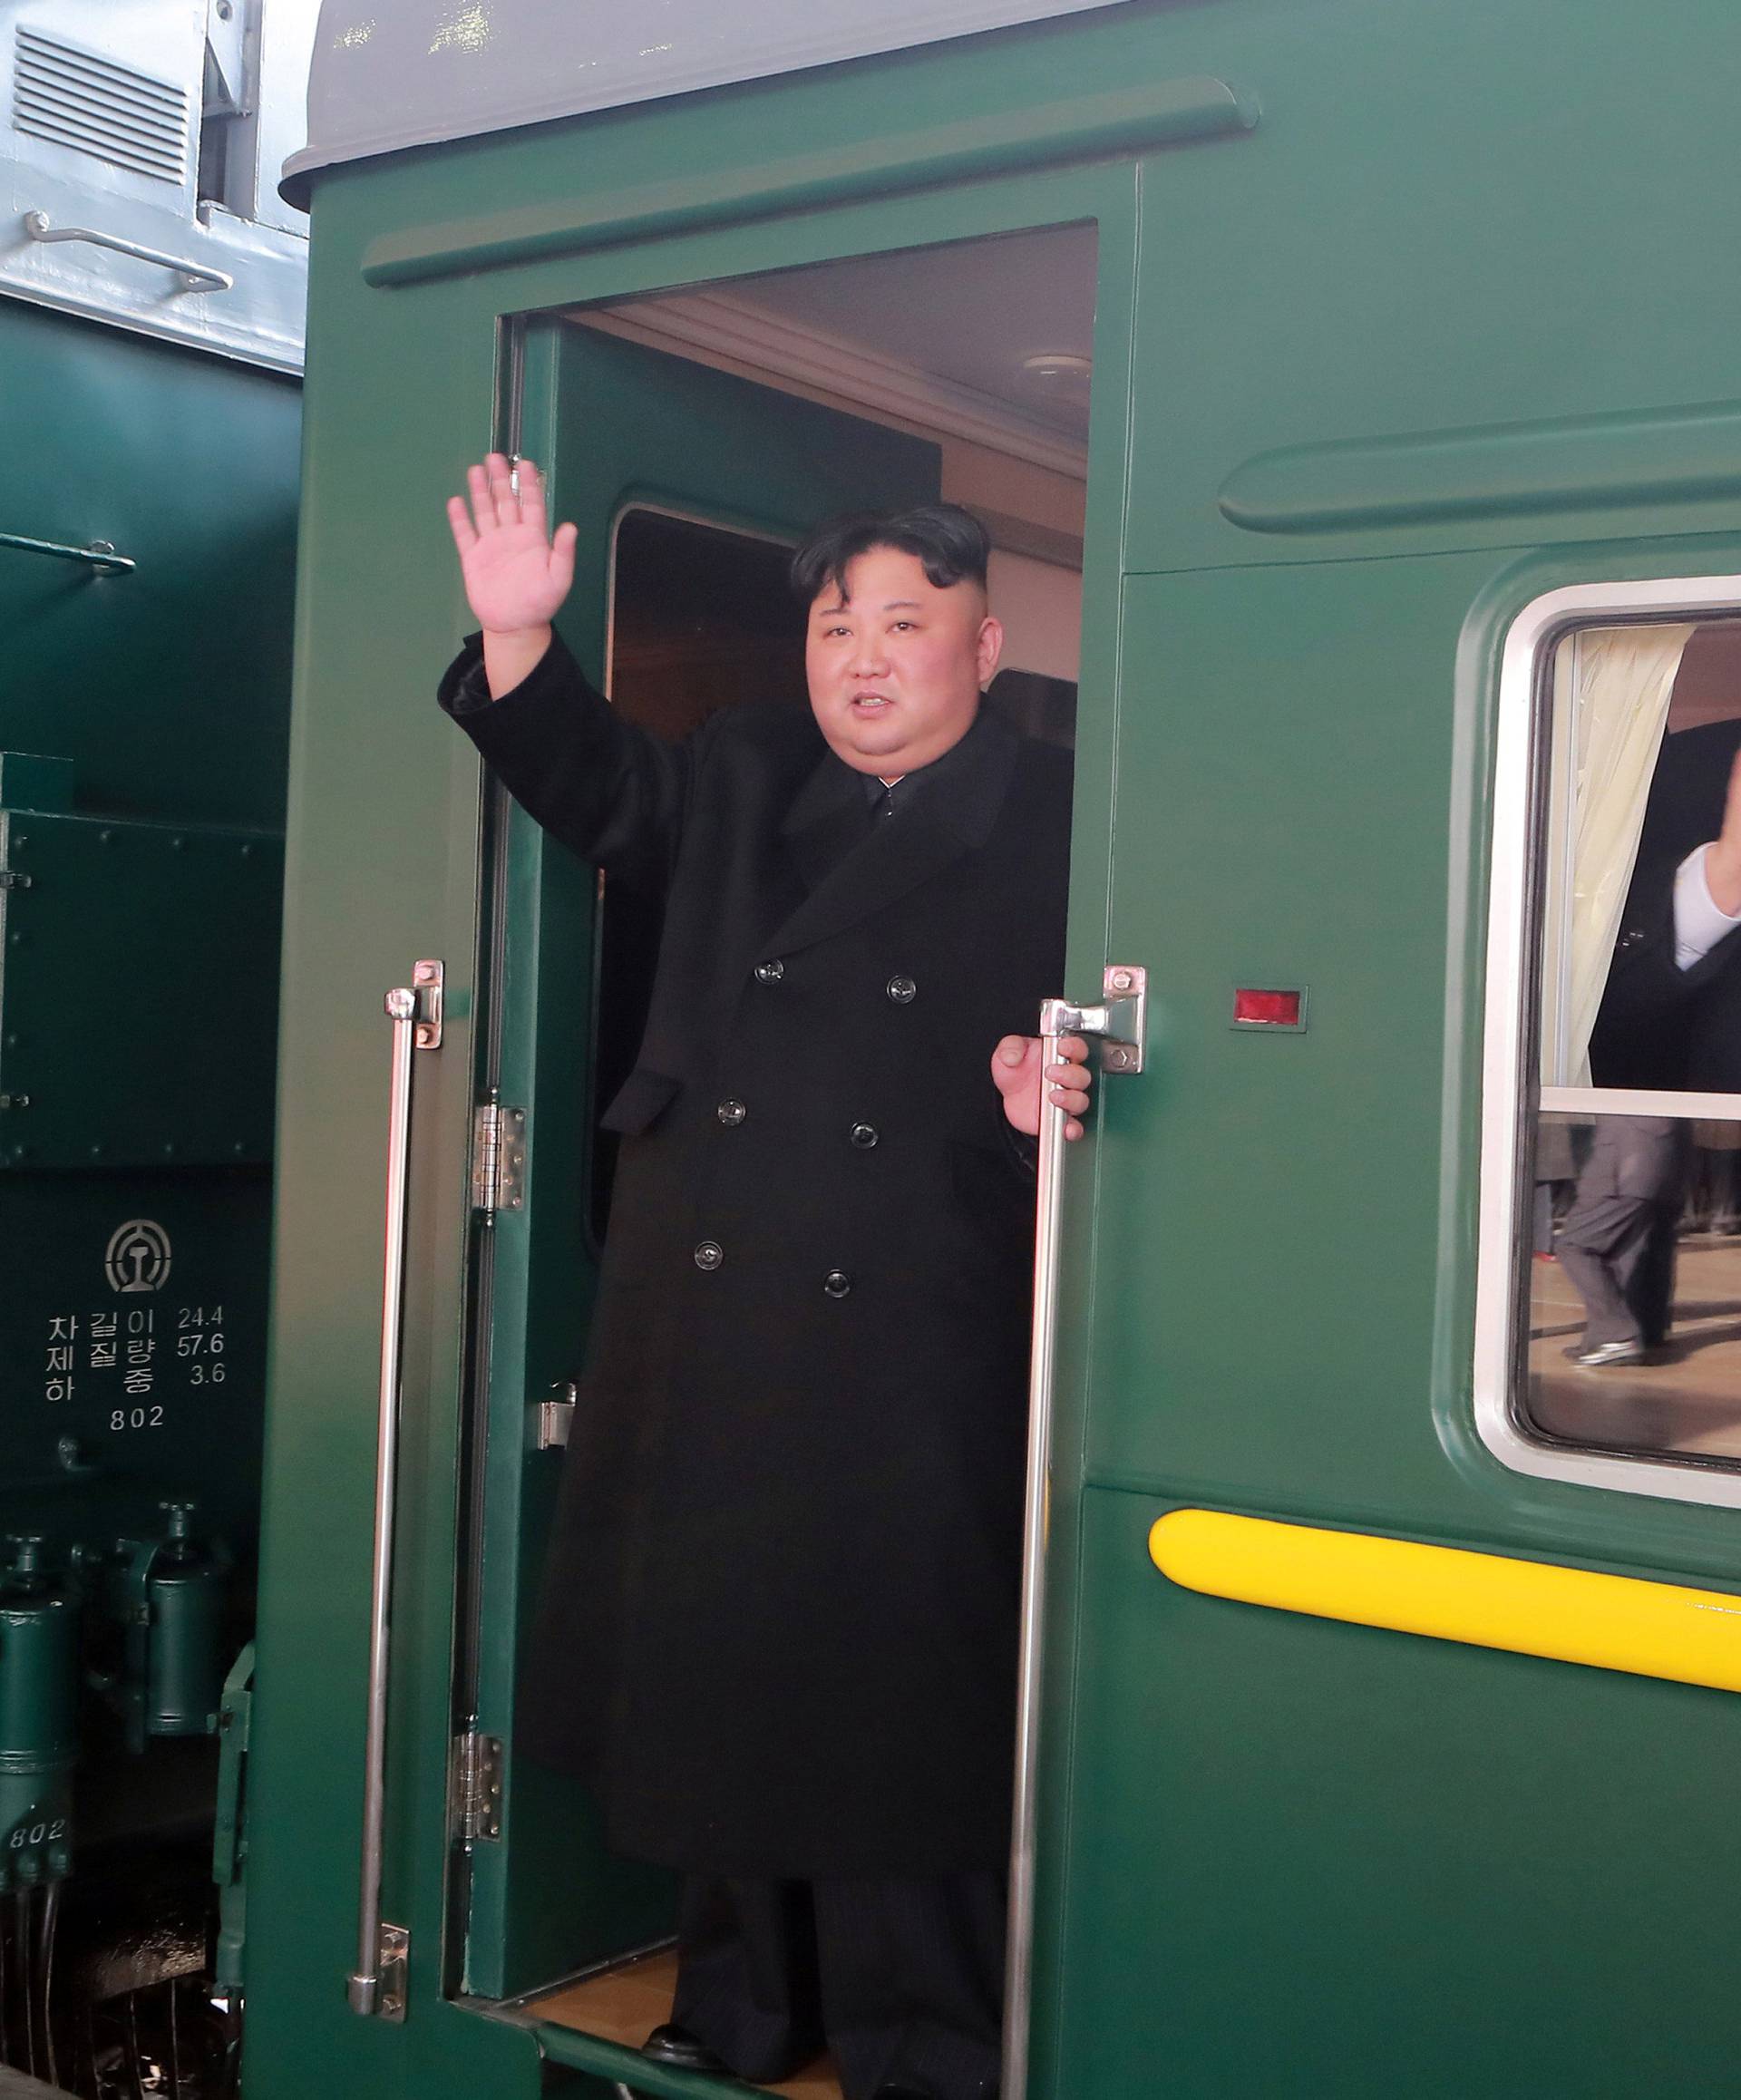 North Korean leader Kim Jong Un waves from a train as he departs for a summit in Hanoi